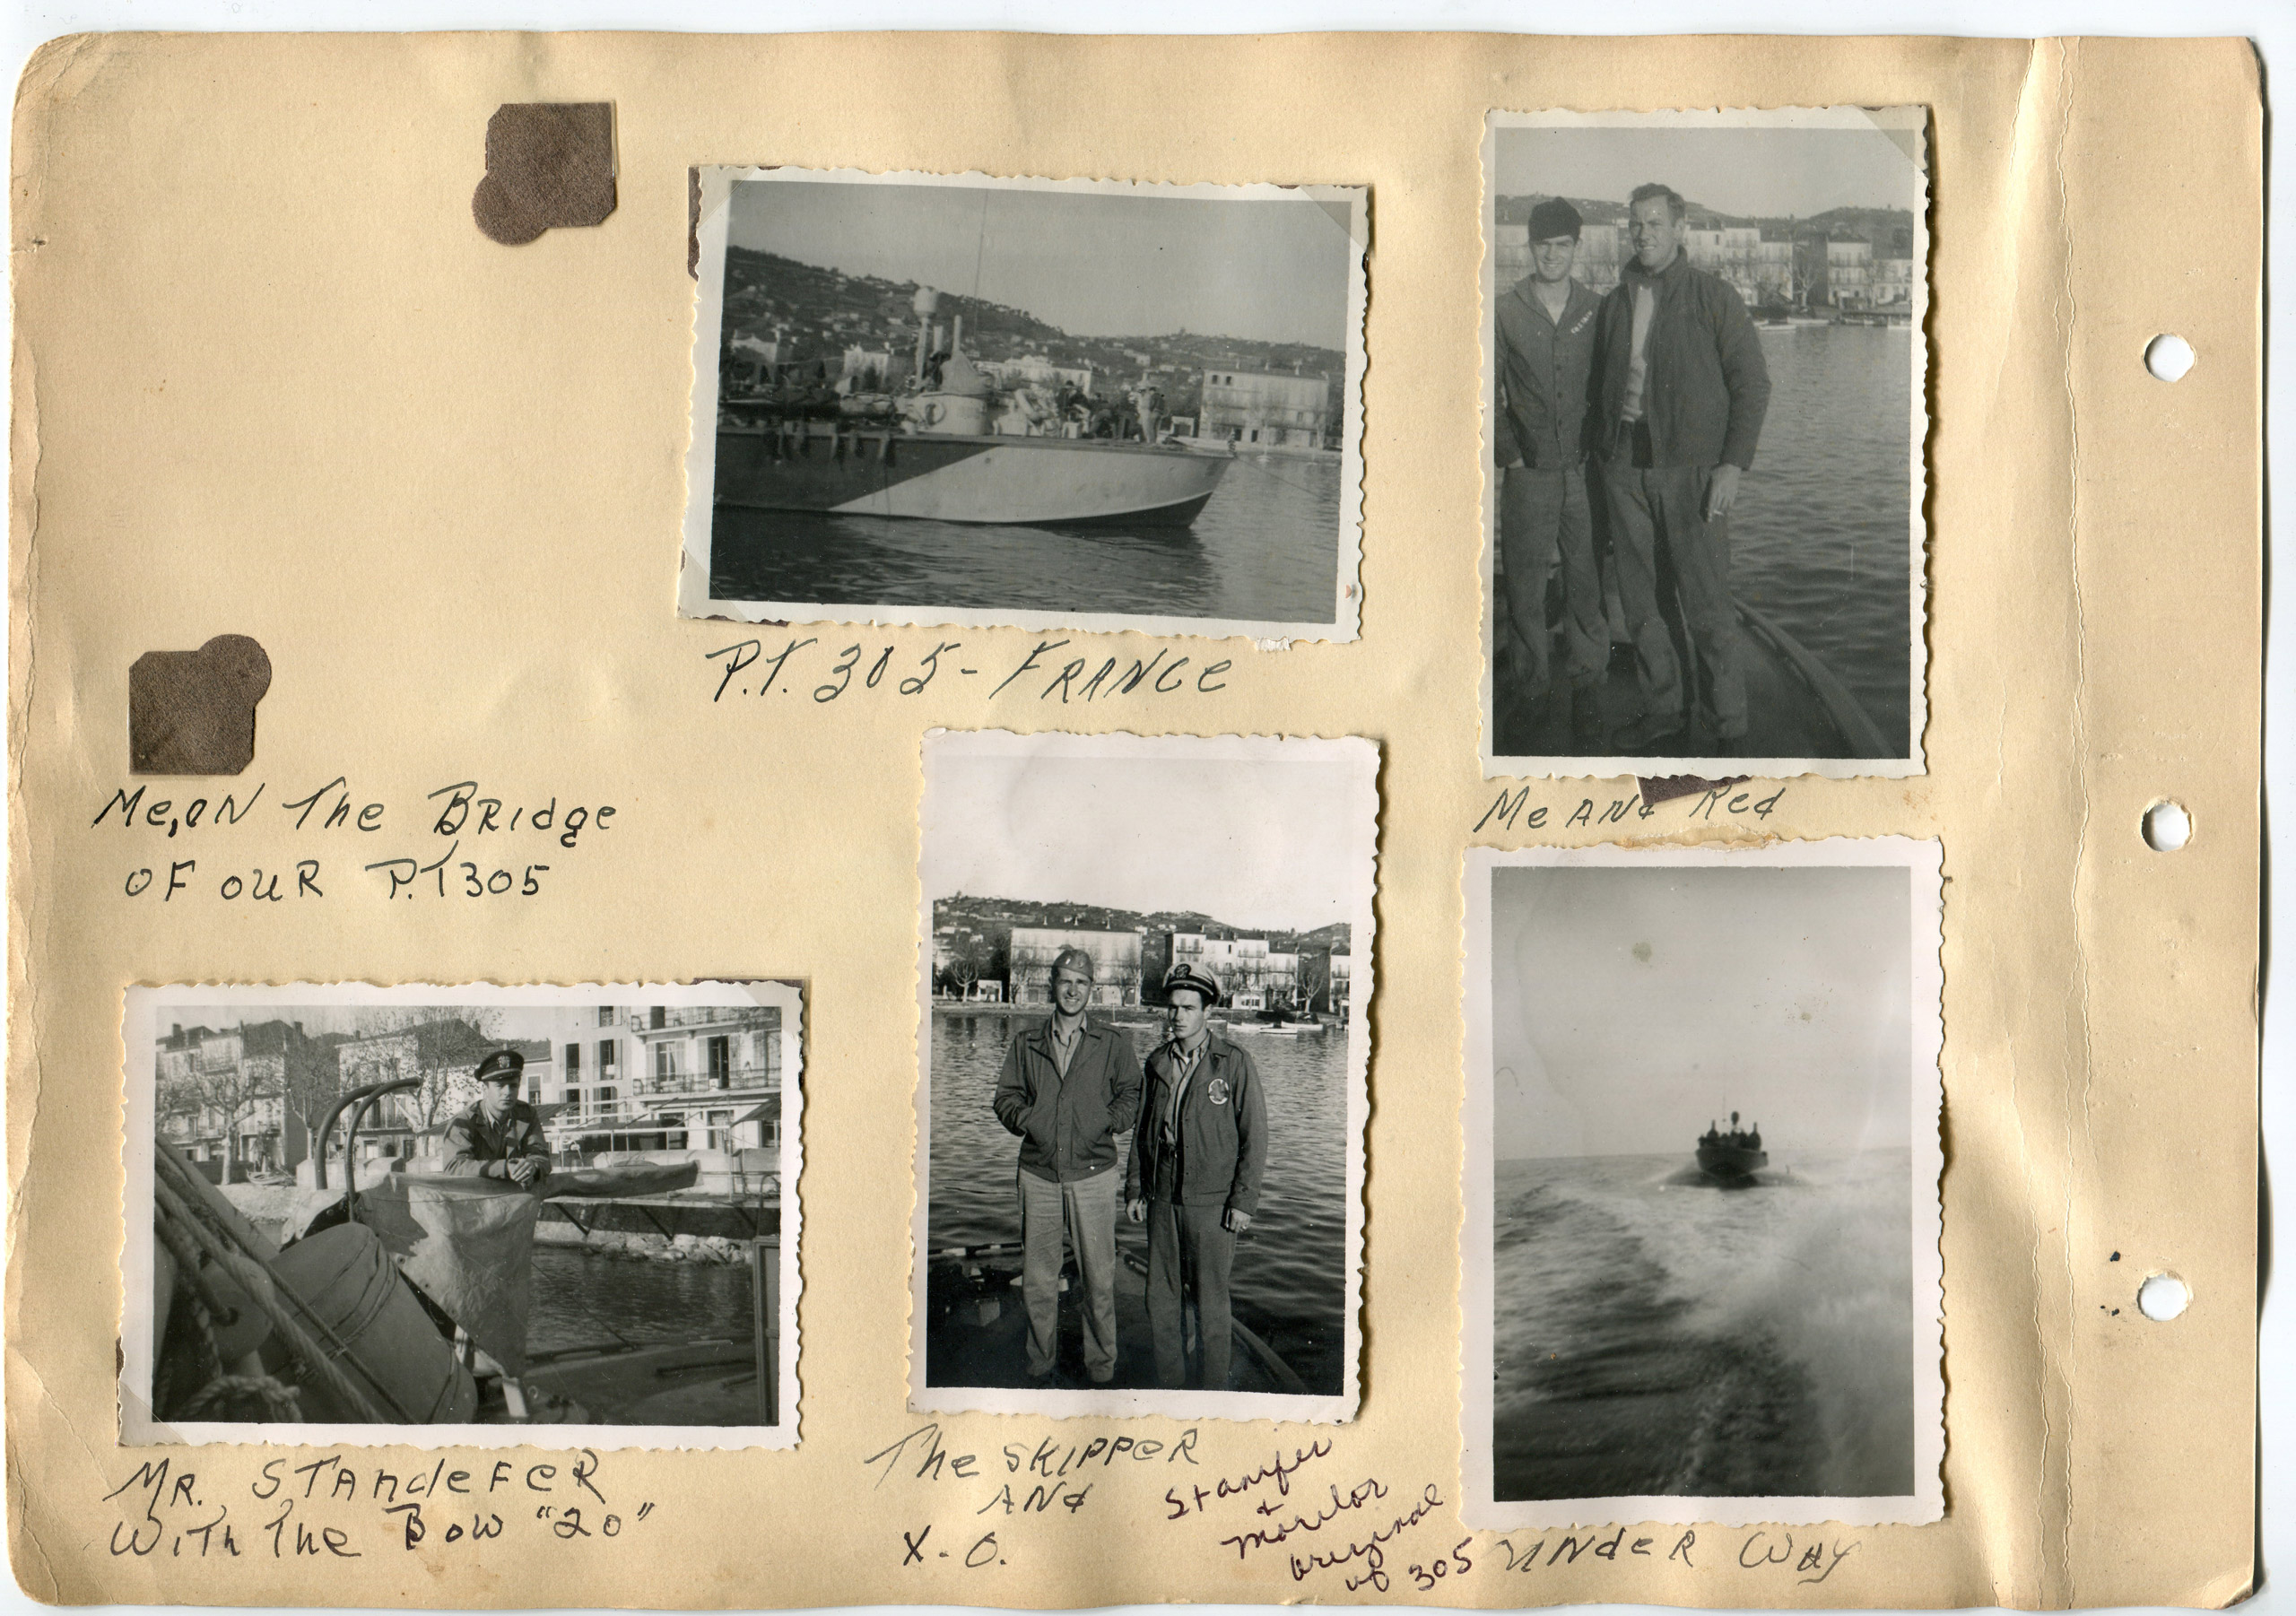 Scrapbook and photos by Motor Machinist's Mate 2nd Class Caption Edric Costain while serving on PT-305 from 1944-1945.